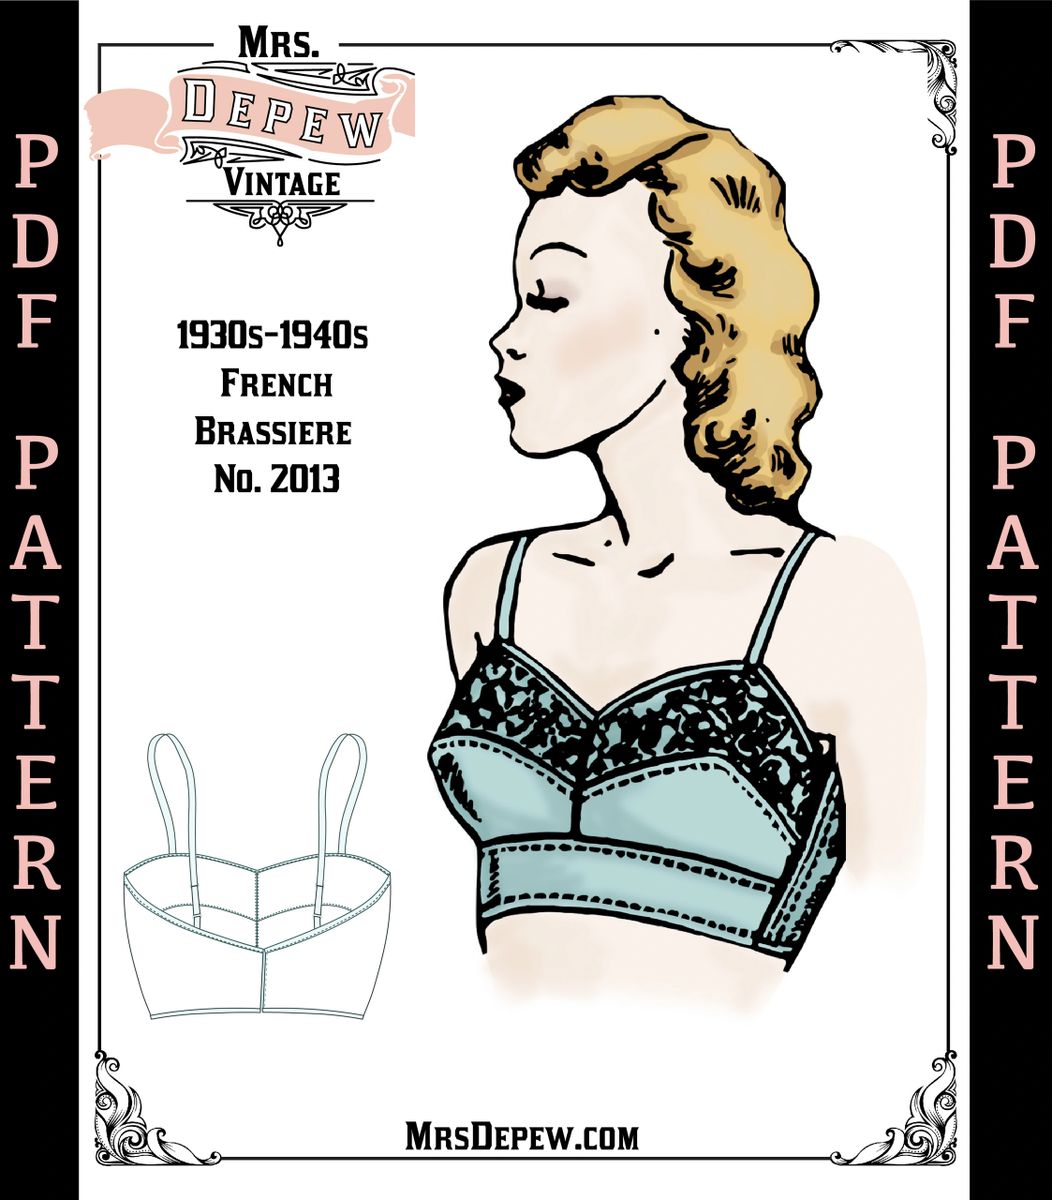 Vintage Sewing Pattern Ladies 1930s - 1940s French Bra Printable Multisize  Depew #2013 31-49 Bust -INSTANT DOWNLOAD